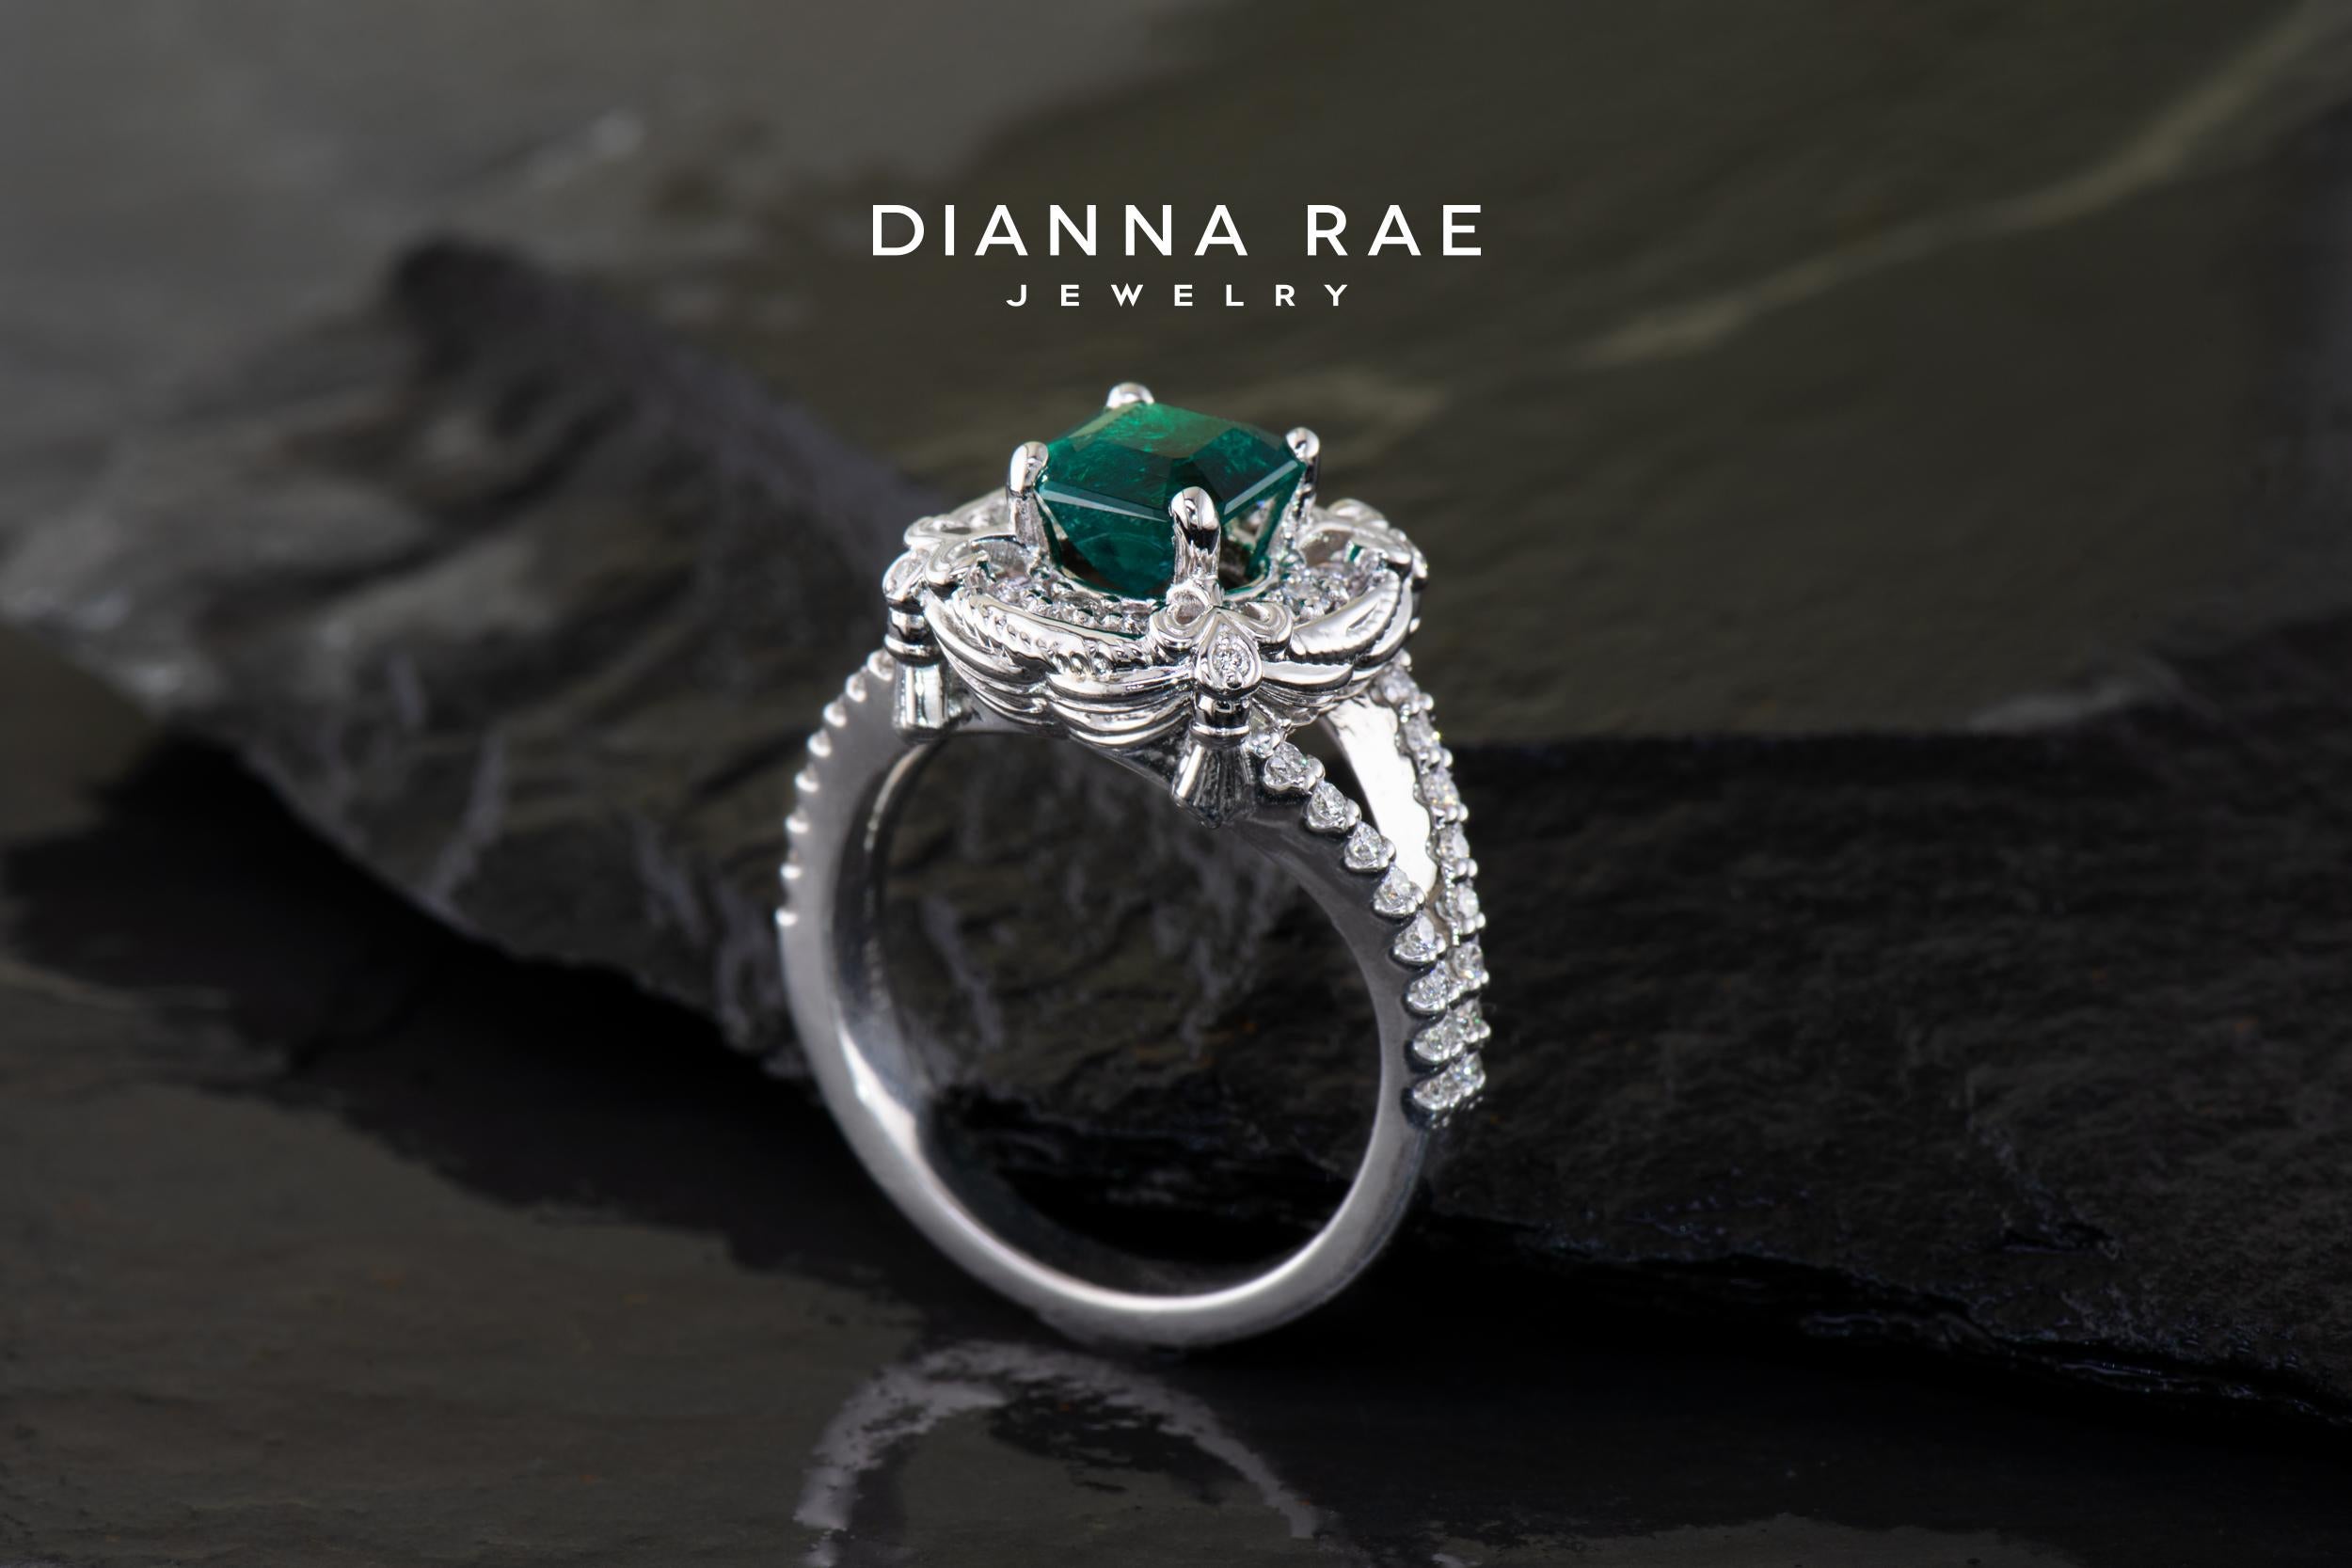 Part of the Dianna Rae Original Theatre Collection, Saenger is a fresh take on a classic Emerald Ring. Featuring a 1.30 carat Emerald,  48 diamonds totaling 0.53 carat, and curtains, tassels, and scrolls flowing along the confines of this unique